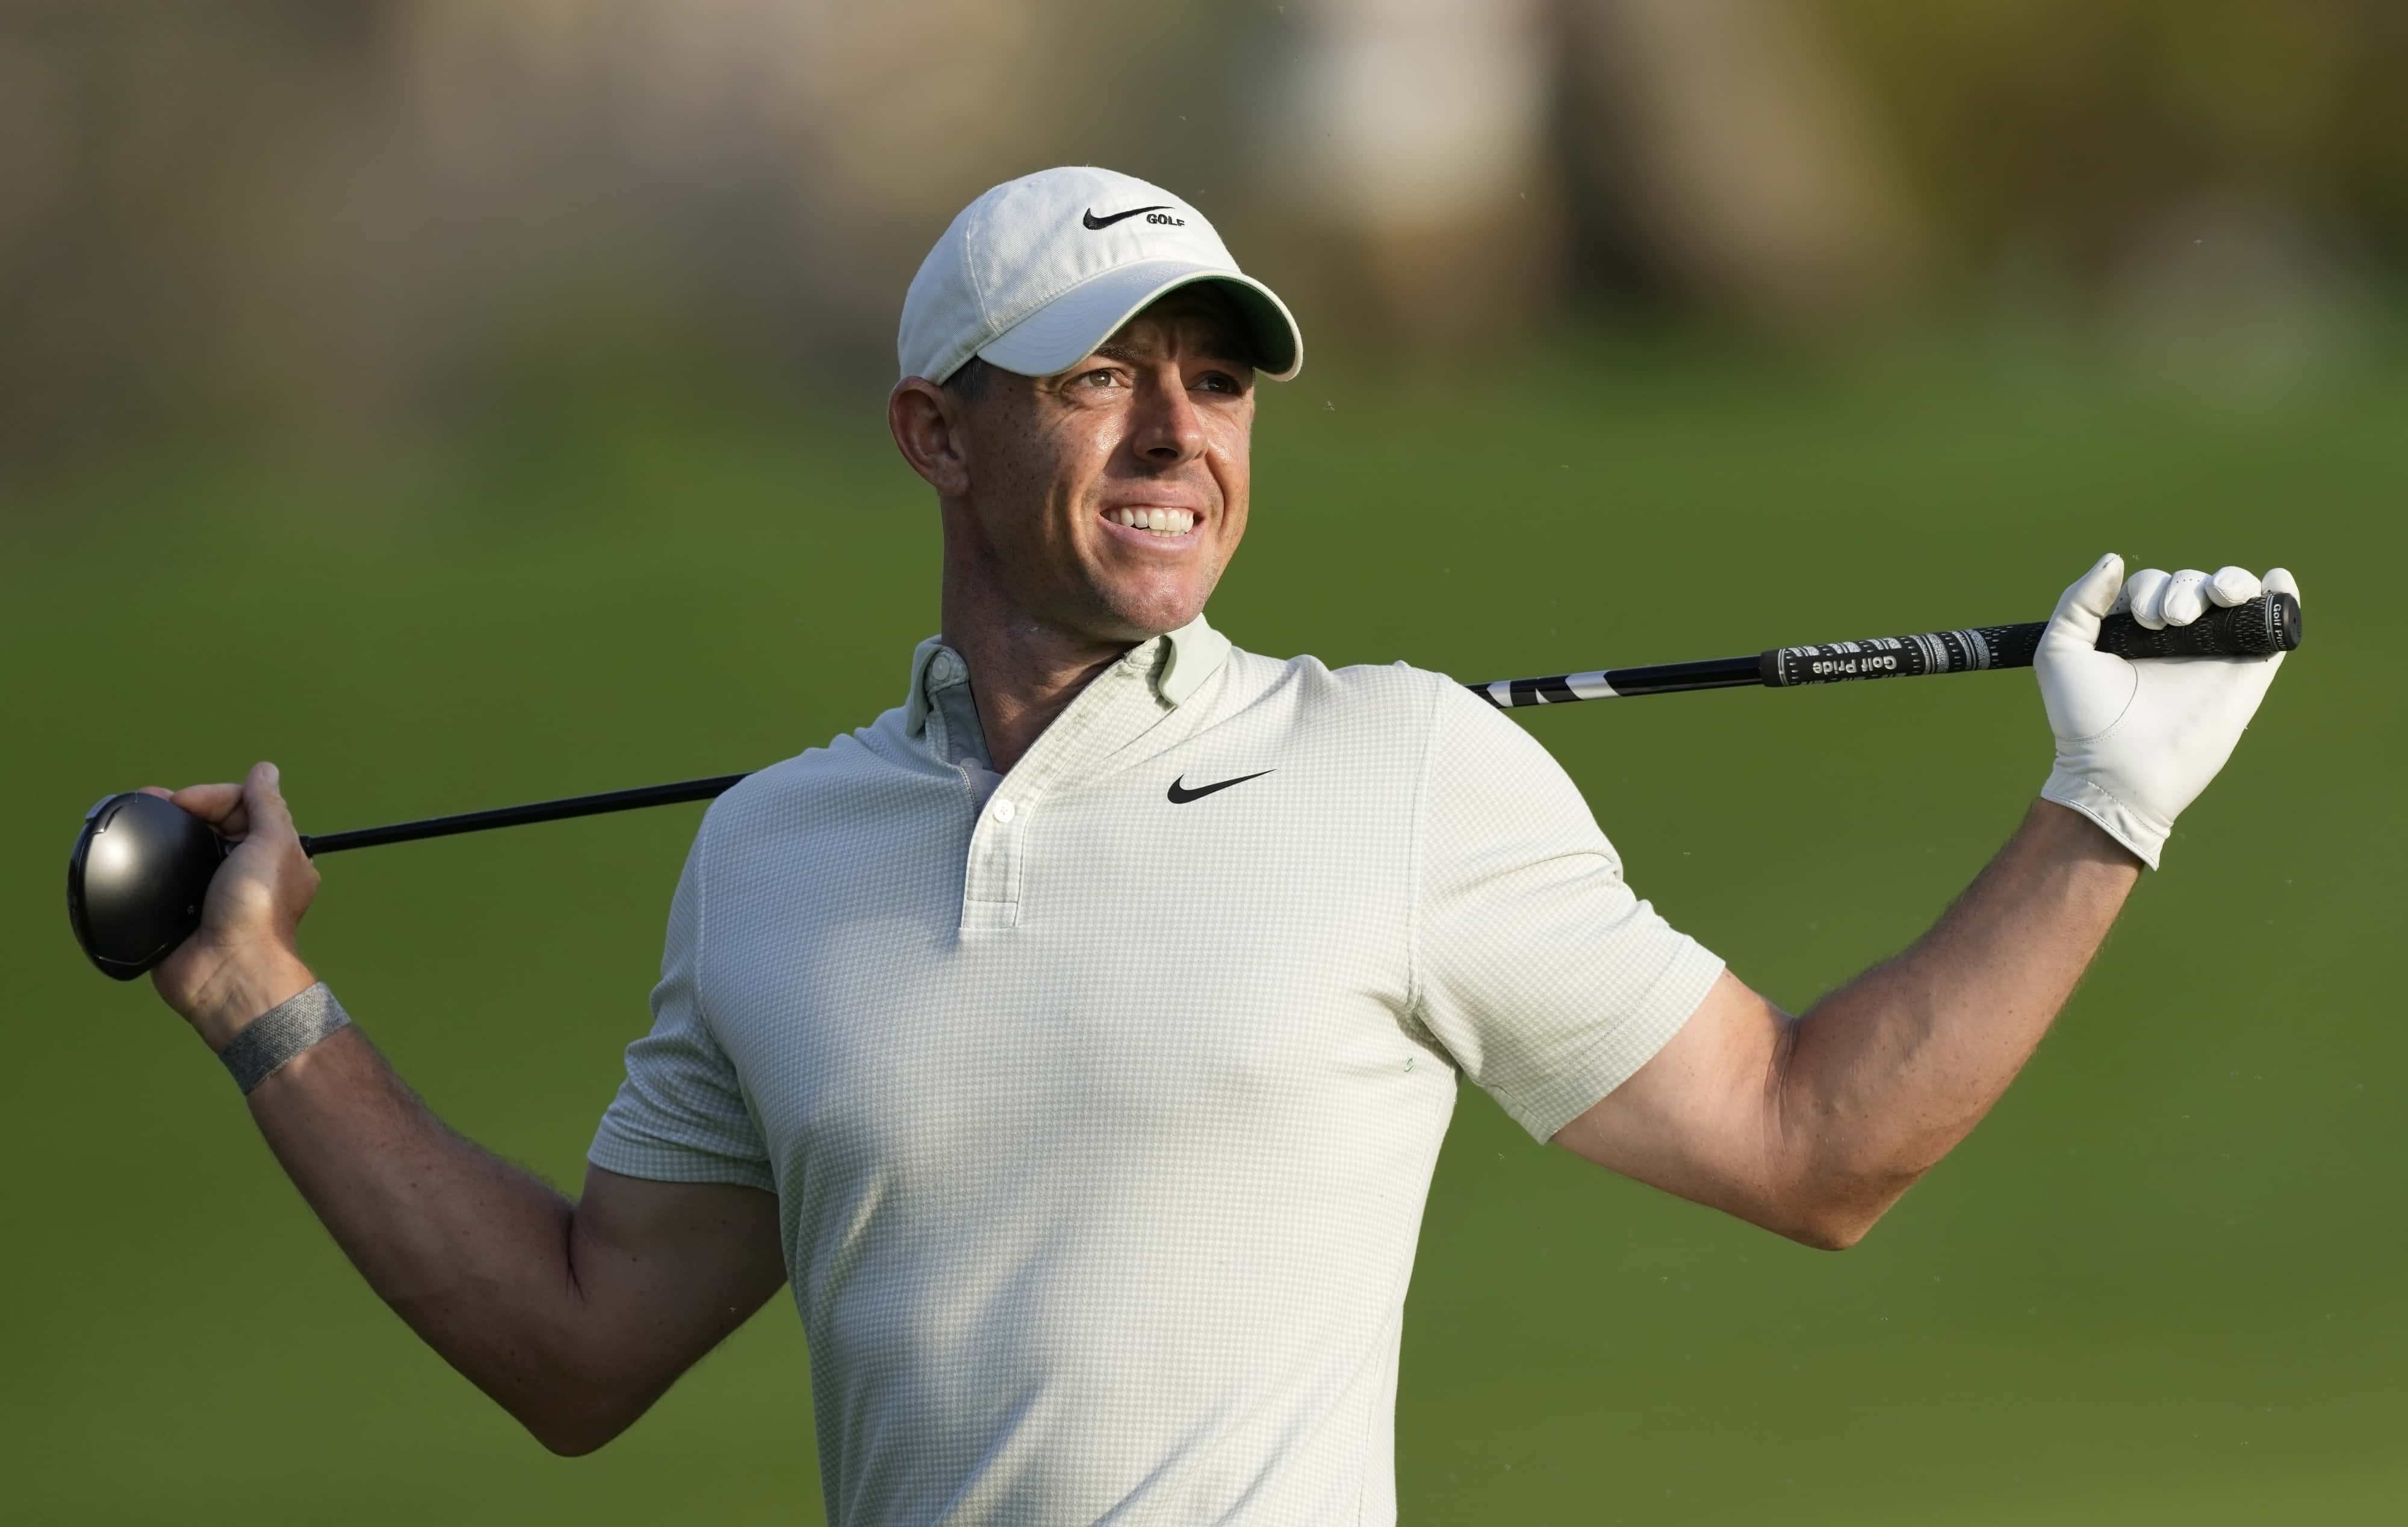 After A Practice Round, Rory McIlroy Gives Tiger Woods An Update